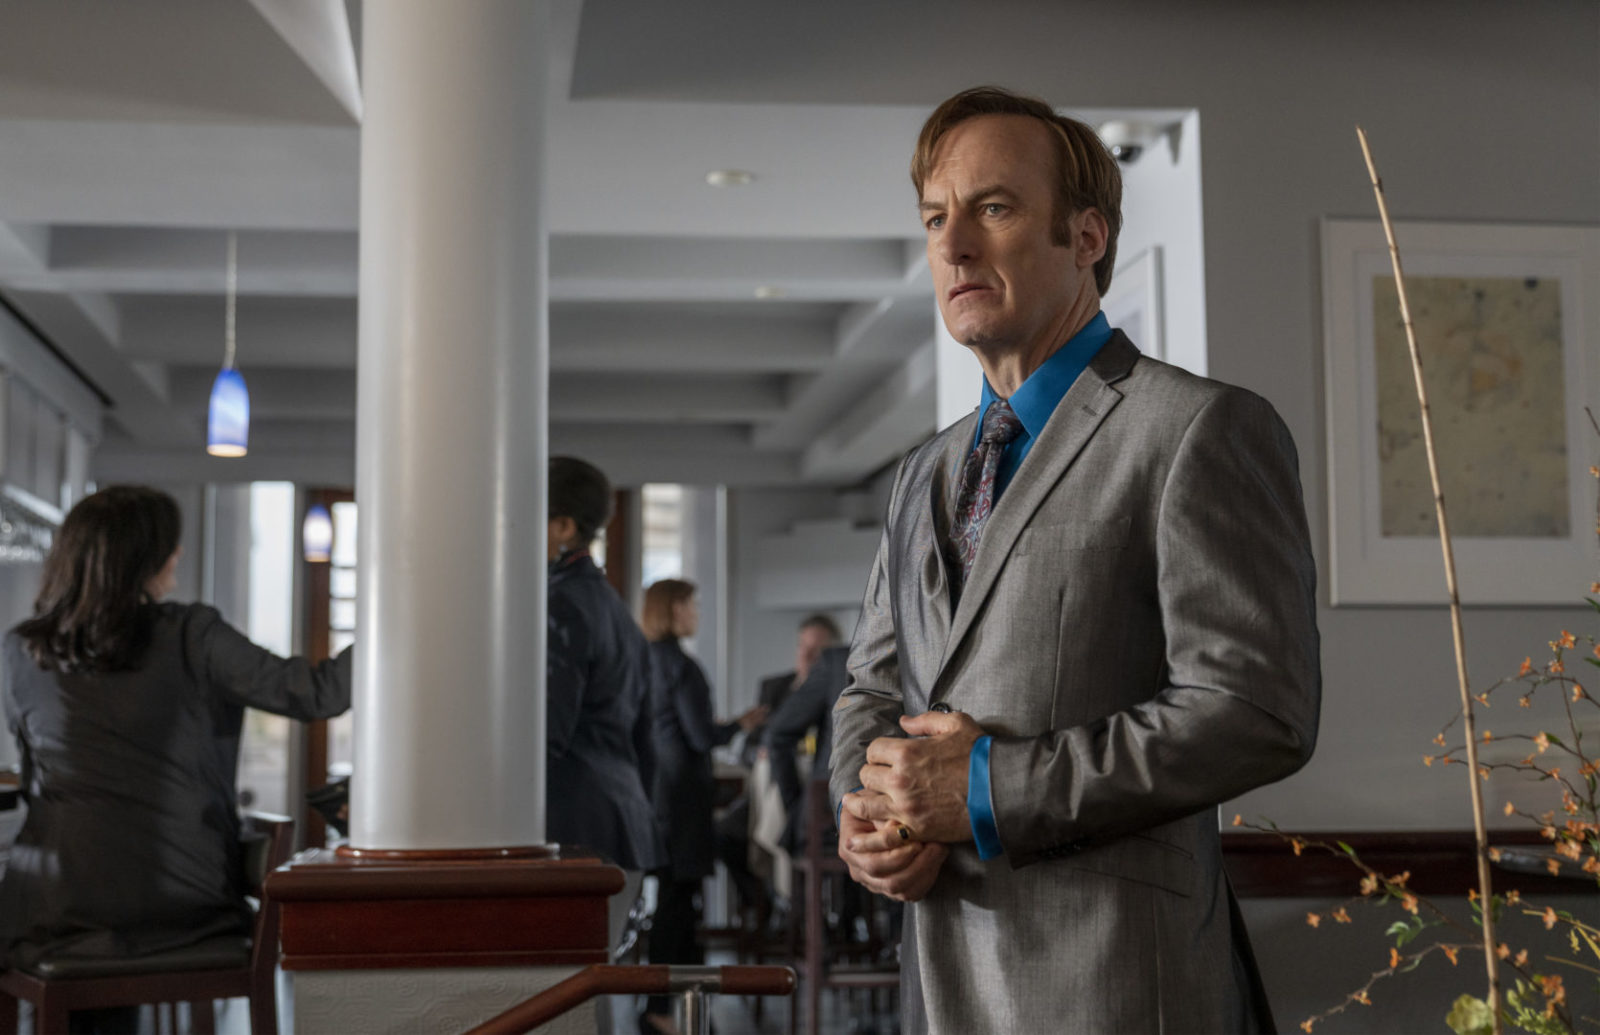 Better Call Saul Season 6 Release Date, Plot, Cast, and Everything We Know So Far